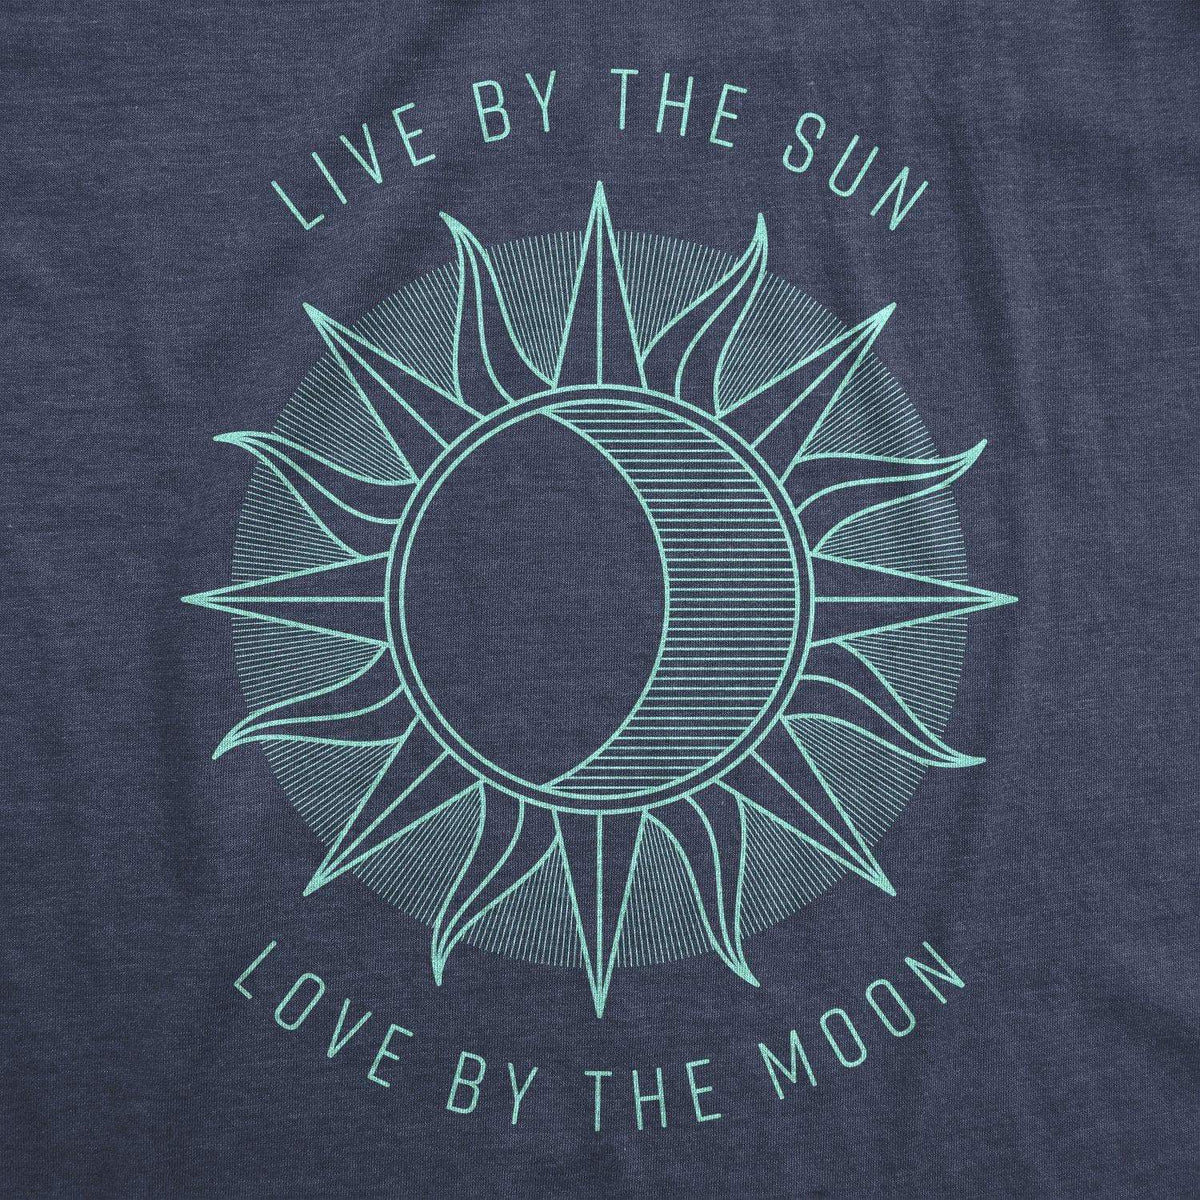 Live By The Sun Love By The Moon Women&#39;s Tshirt  -  Crazy Dog T-Shirts